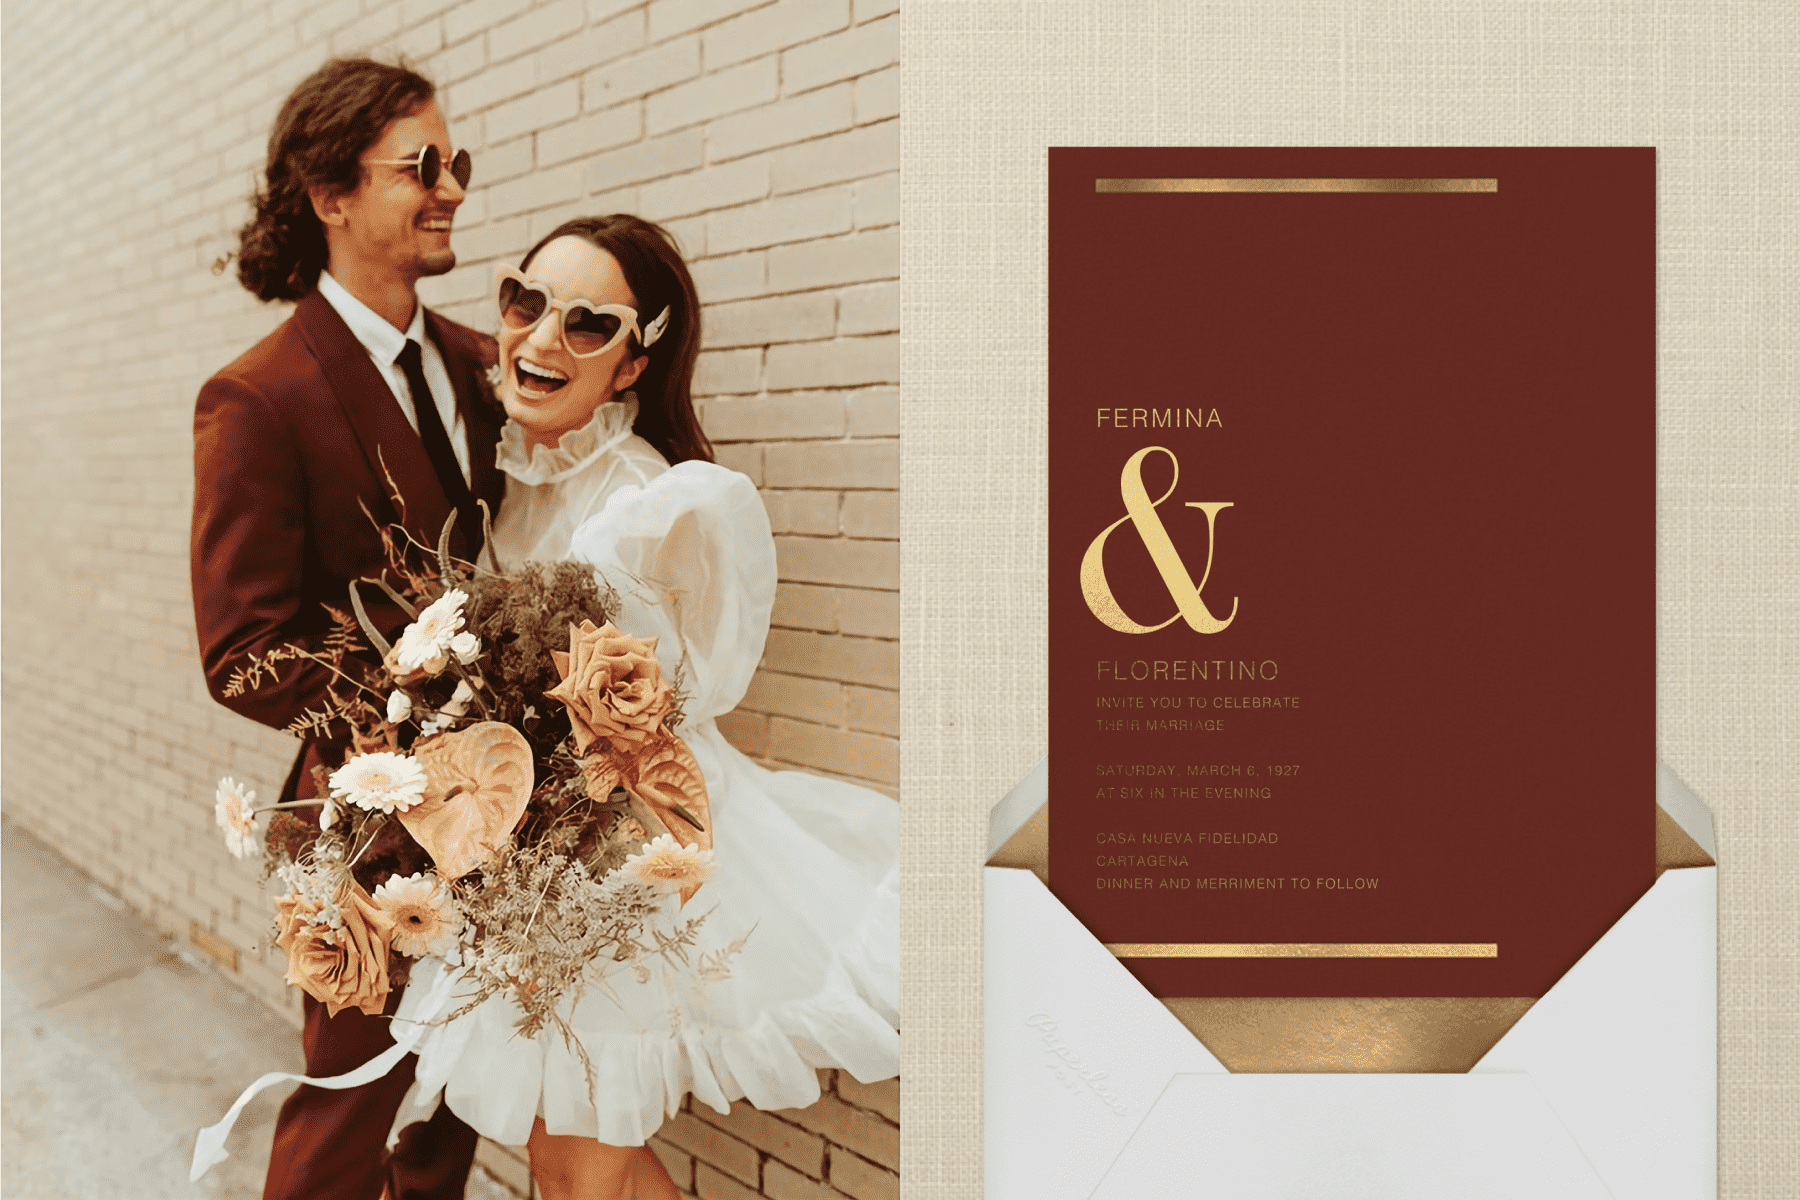 Alt text, left: A couple in wedding attire embrace and smile. Right: A burgundy wedding invitation with gold foil and a large ampersand between the couple’s names.